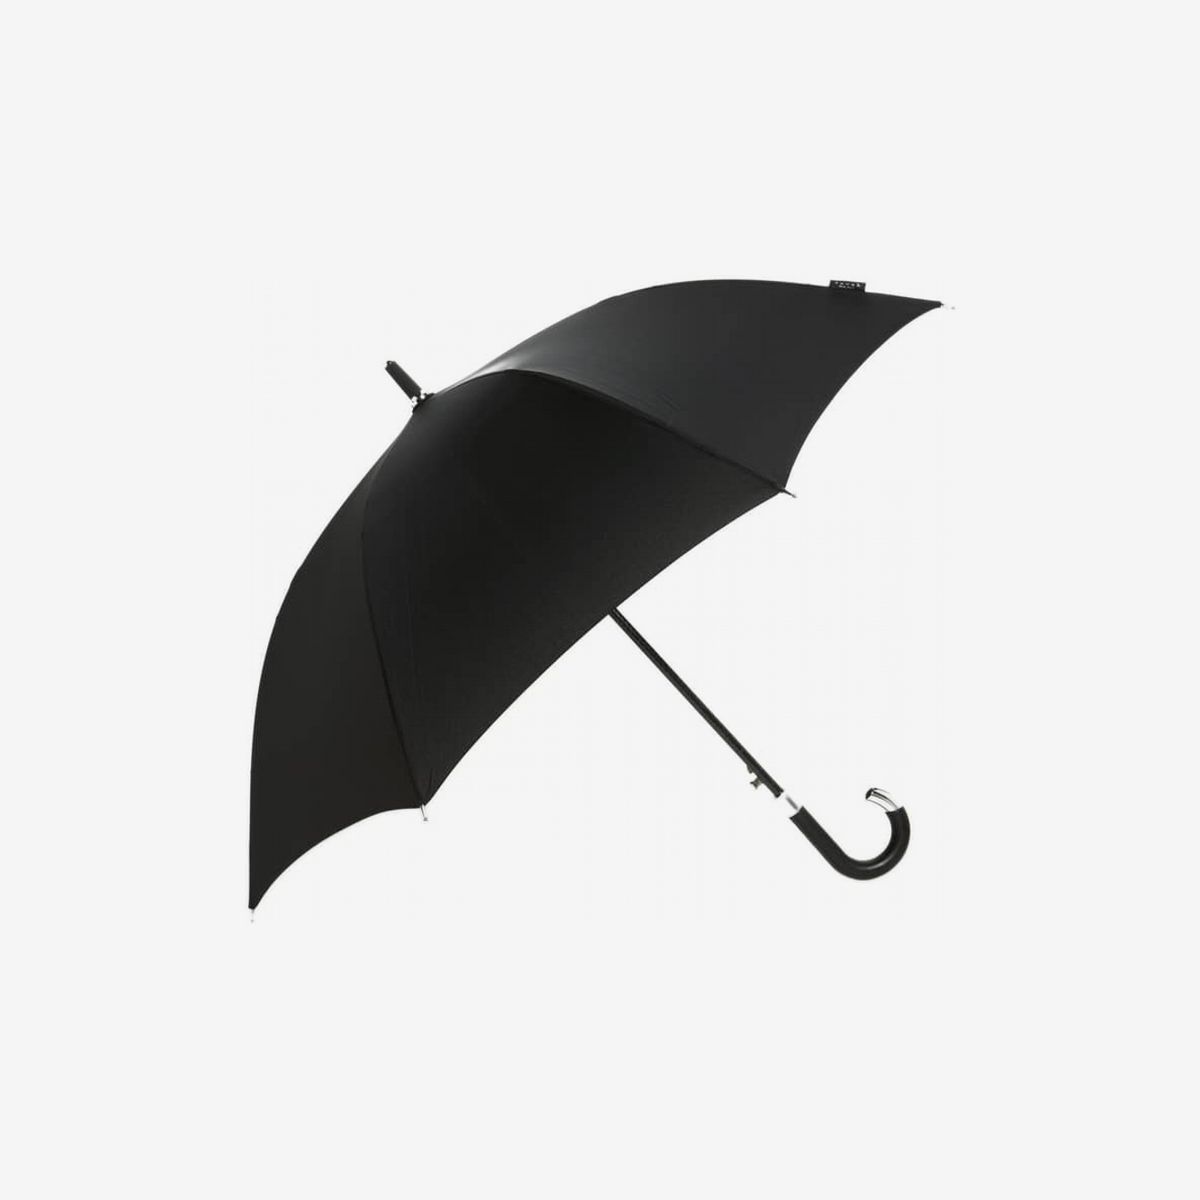 Windproof Umbrella 210T Fabric Canopy Easy Carrying Black Auto Open Close Button for One Handed Operation Leebotree Compact Collapsible Travel Outdoor Umbrella Sturdy 